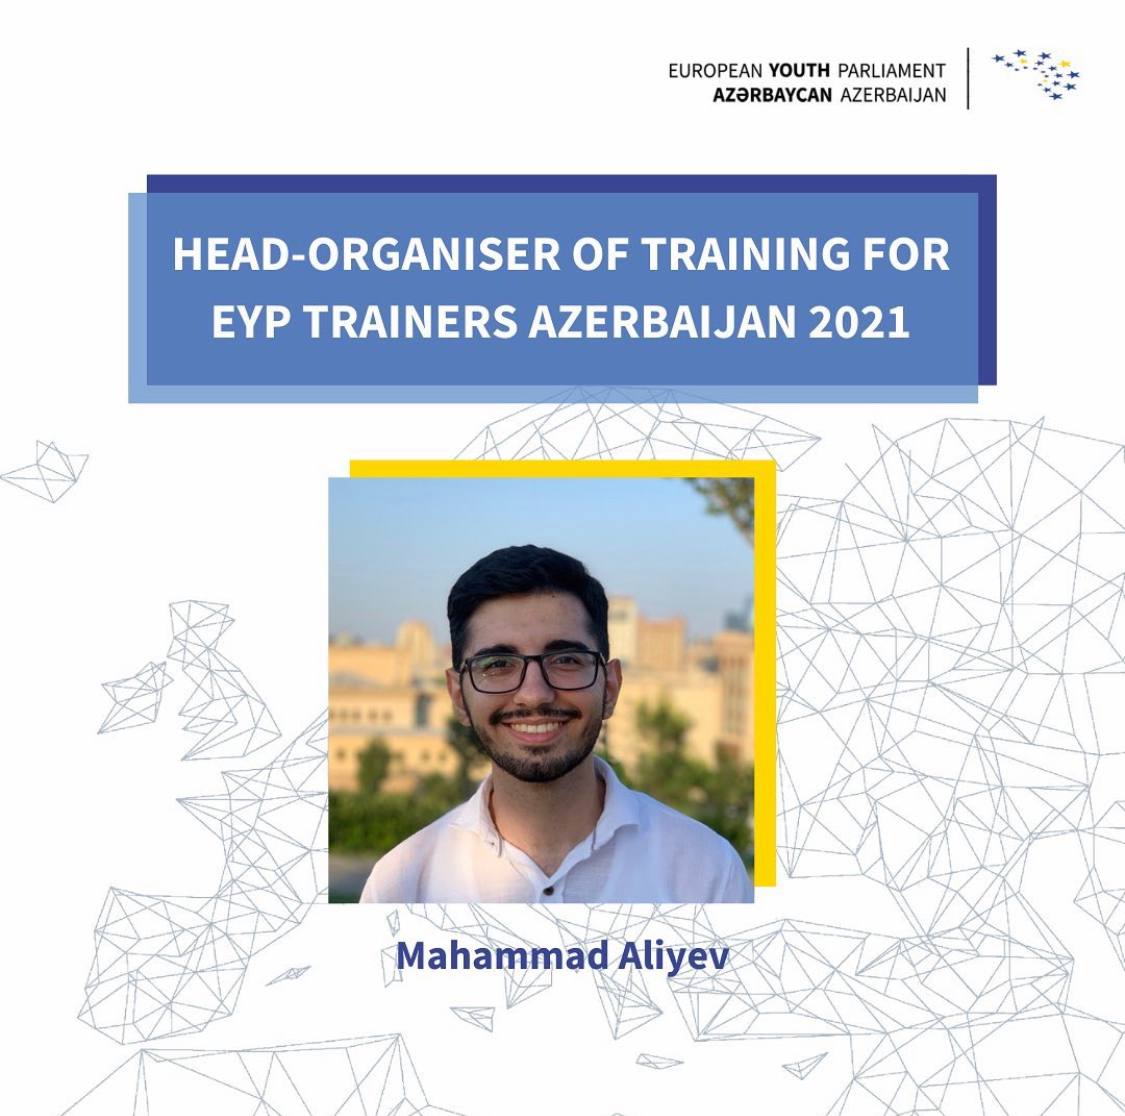 Training for EYP Trainers 2021